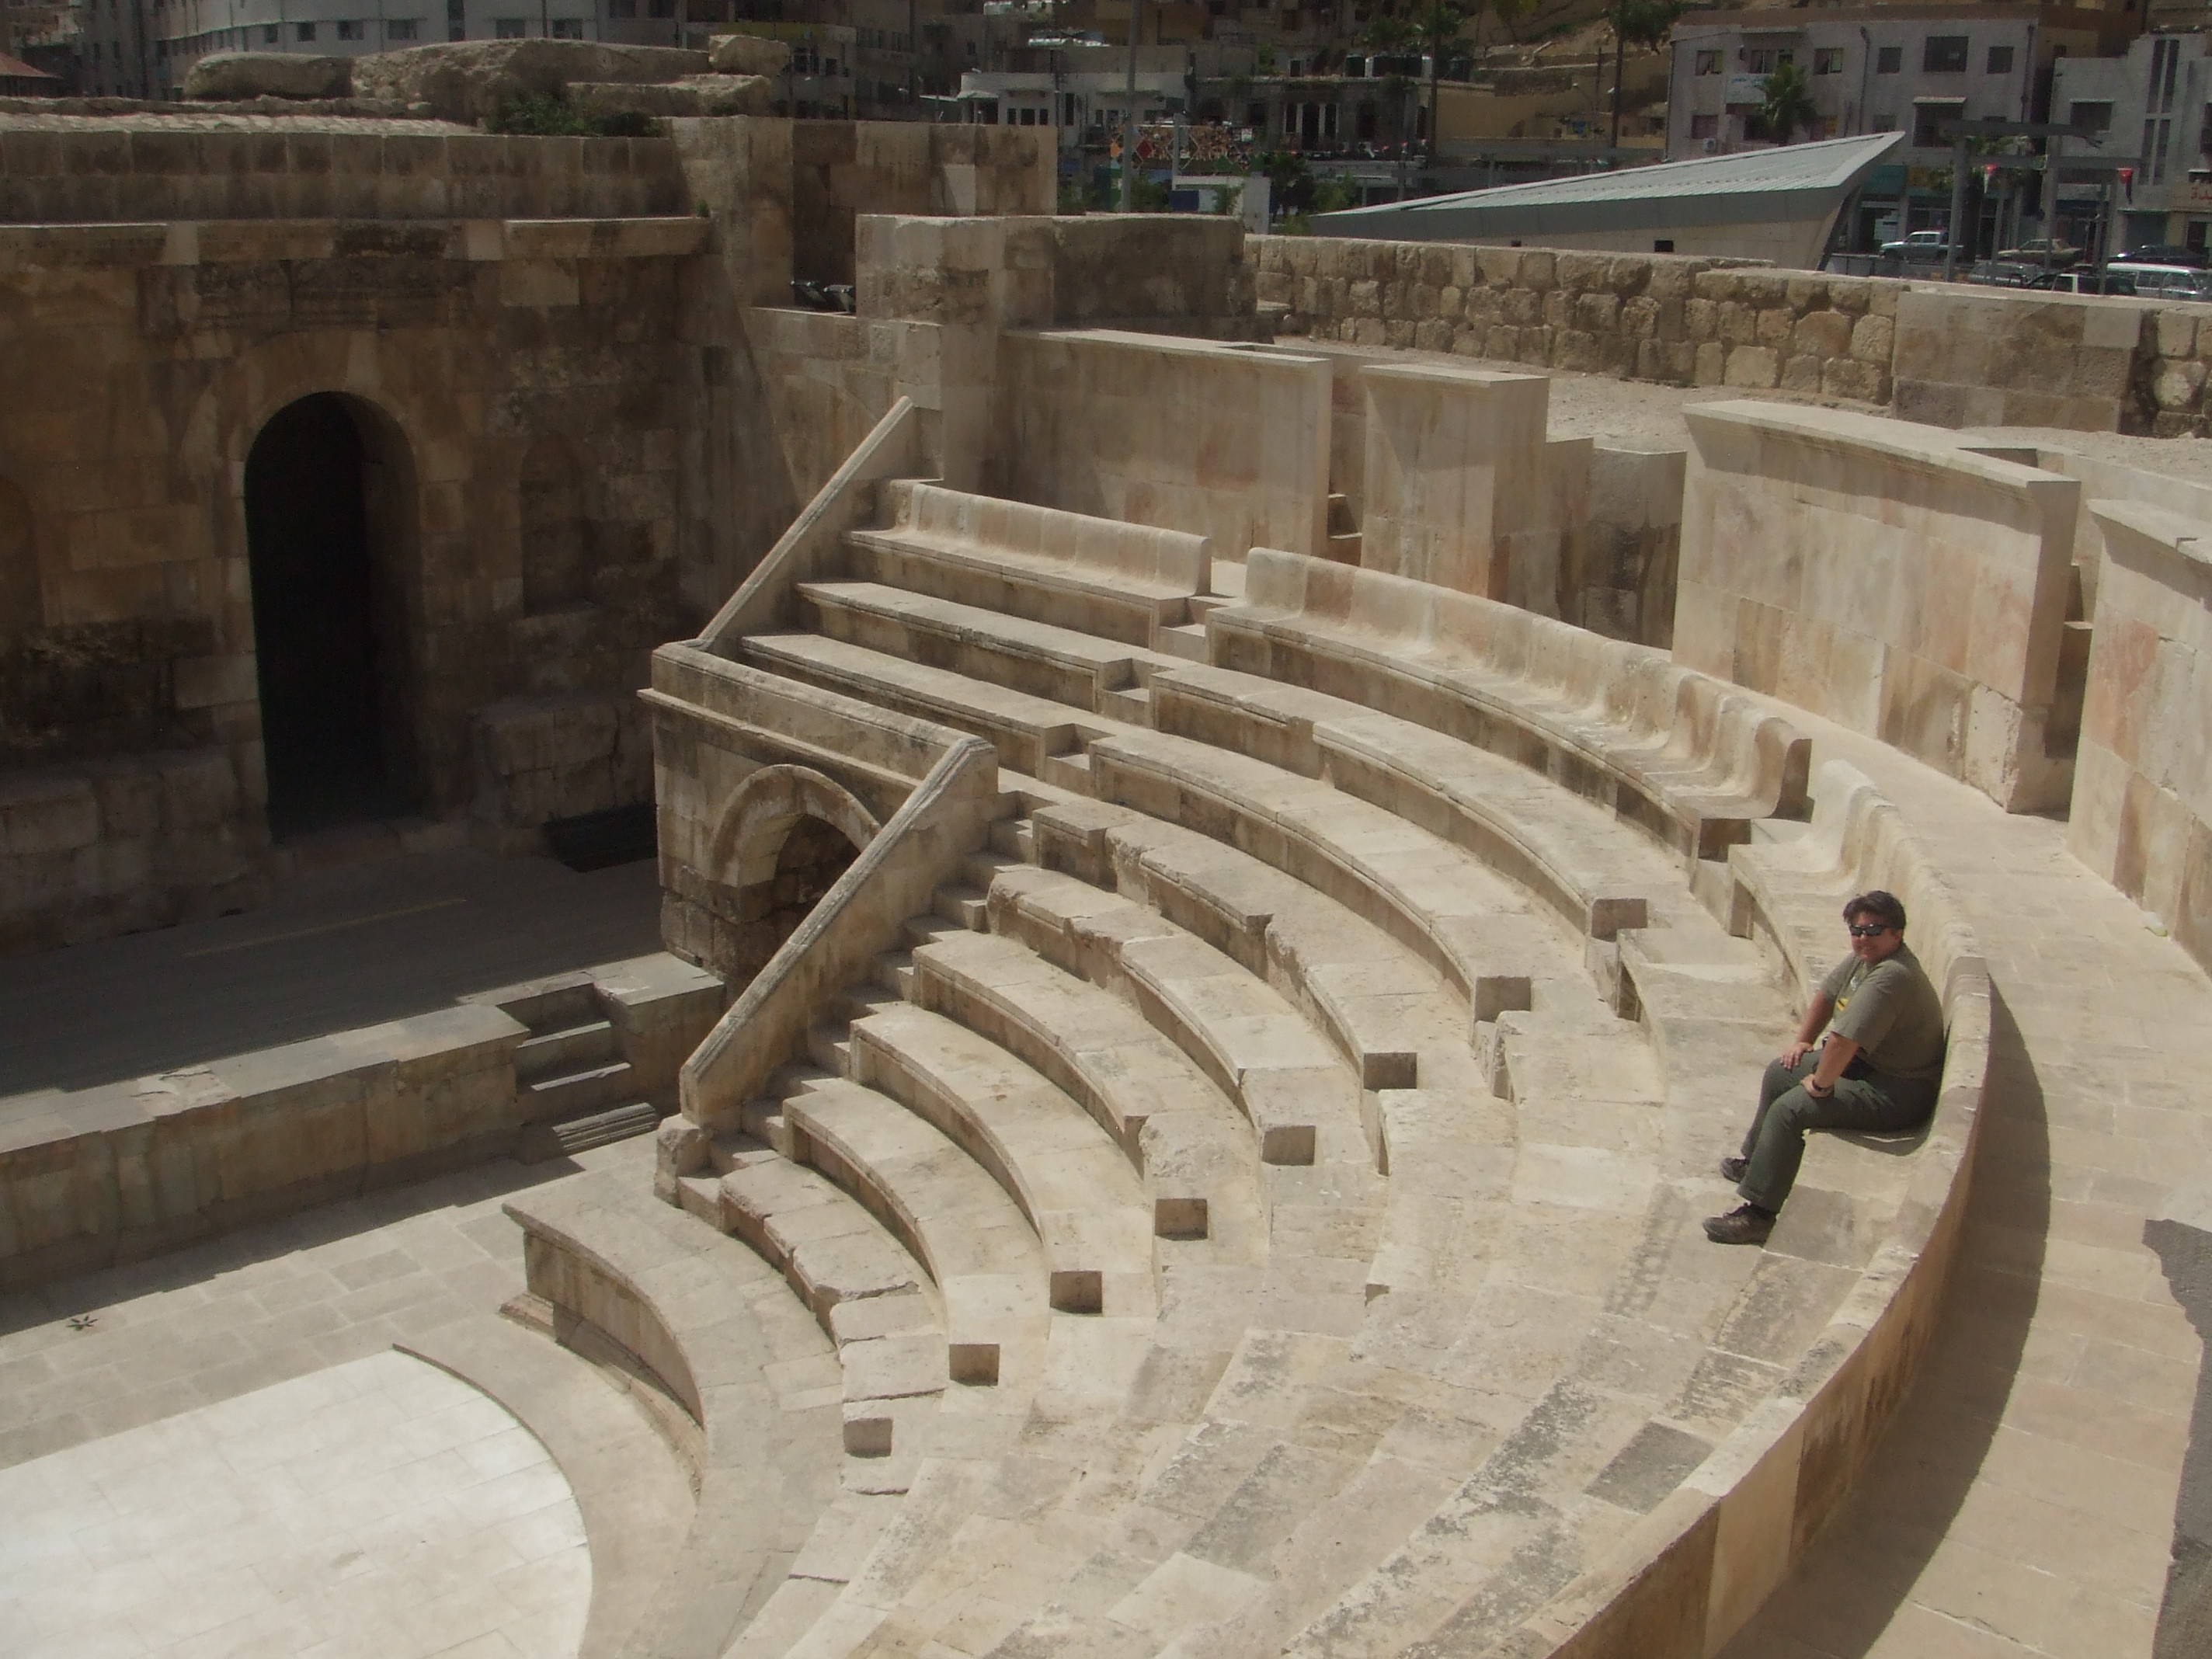 Odeon, Amman The Odeon sits in Hashemite Square adjacent to the much larger amphitheatre and accessible with the same ticket. Amman's city centre may have a modern feel today but is actually one of the oldest continuously inhabited cities in the World, with evidence of its classical past (as the ancient city of Philadelphia) still visible in certain areas. The most important remaining monument of the city's classical past is the stunning Roman amphitheatre. The theatre was built the reign of Antonius Pius (138-161 AD) and could seat up to 6,000 people. Built into the hillside, it was oriented north to keep the fierce sun off the spectators.